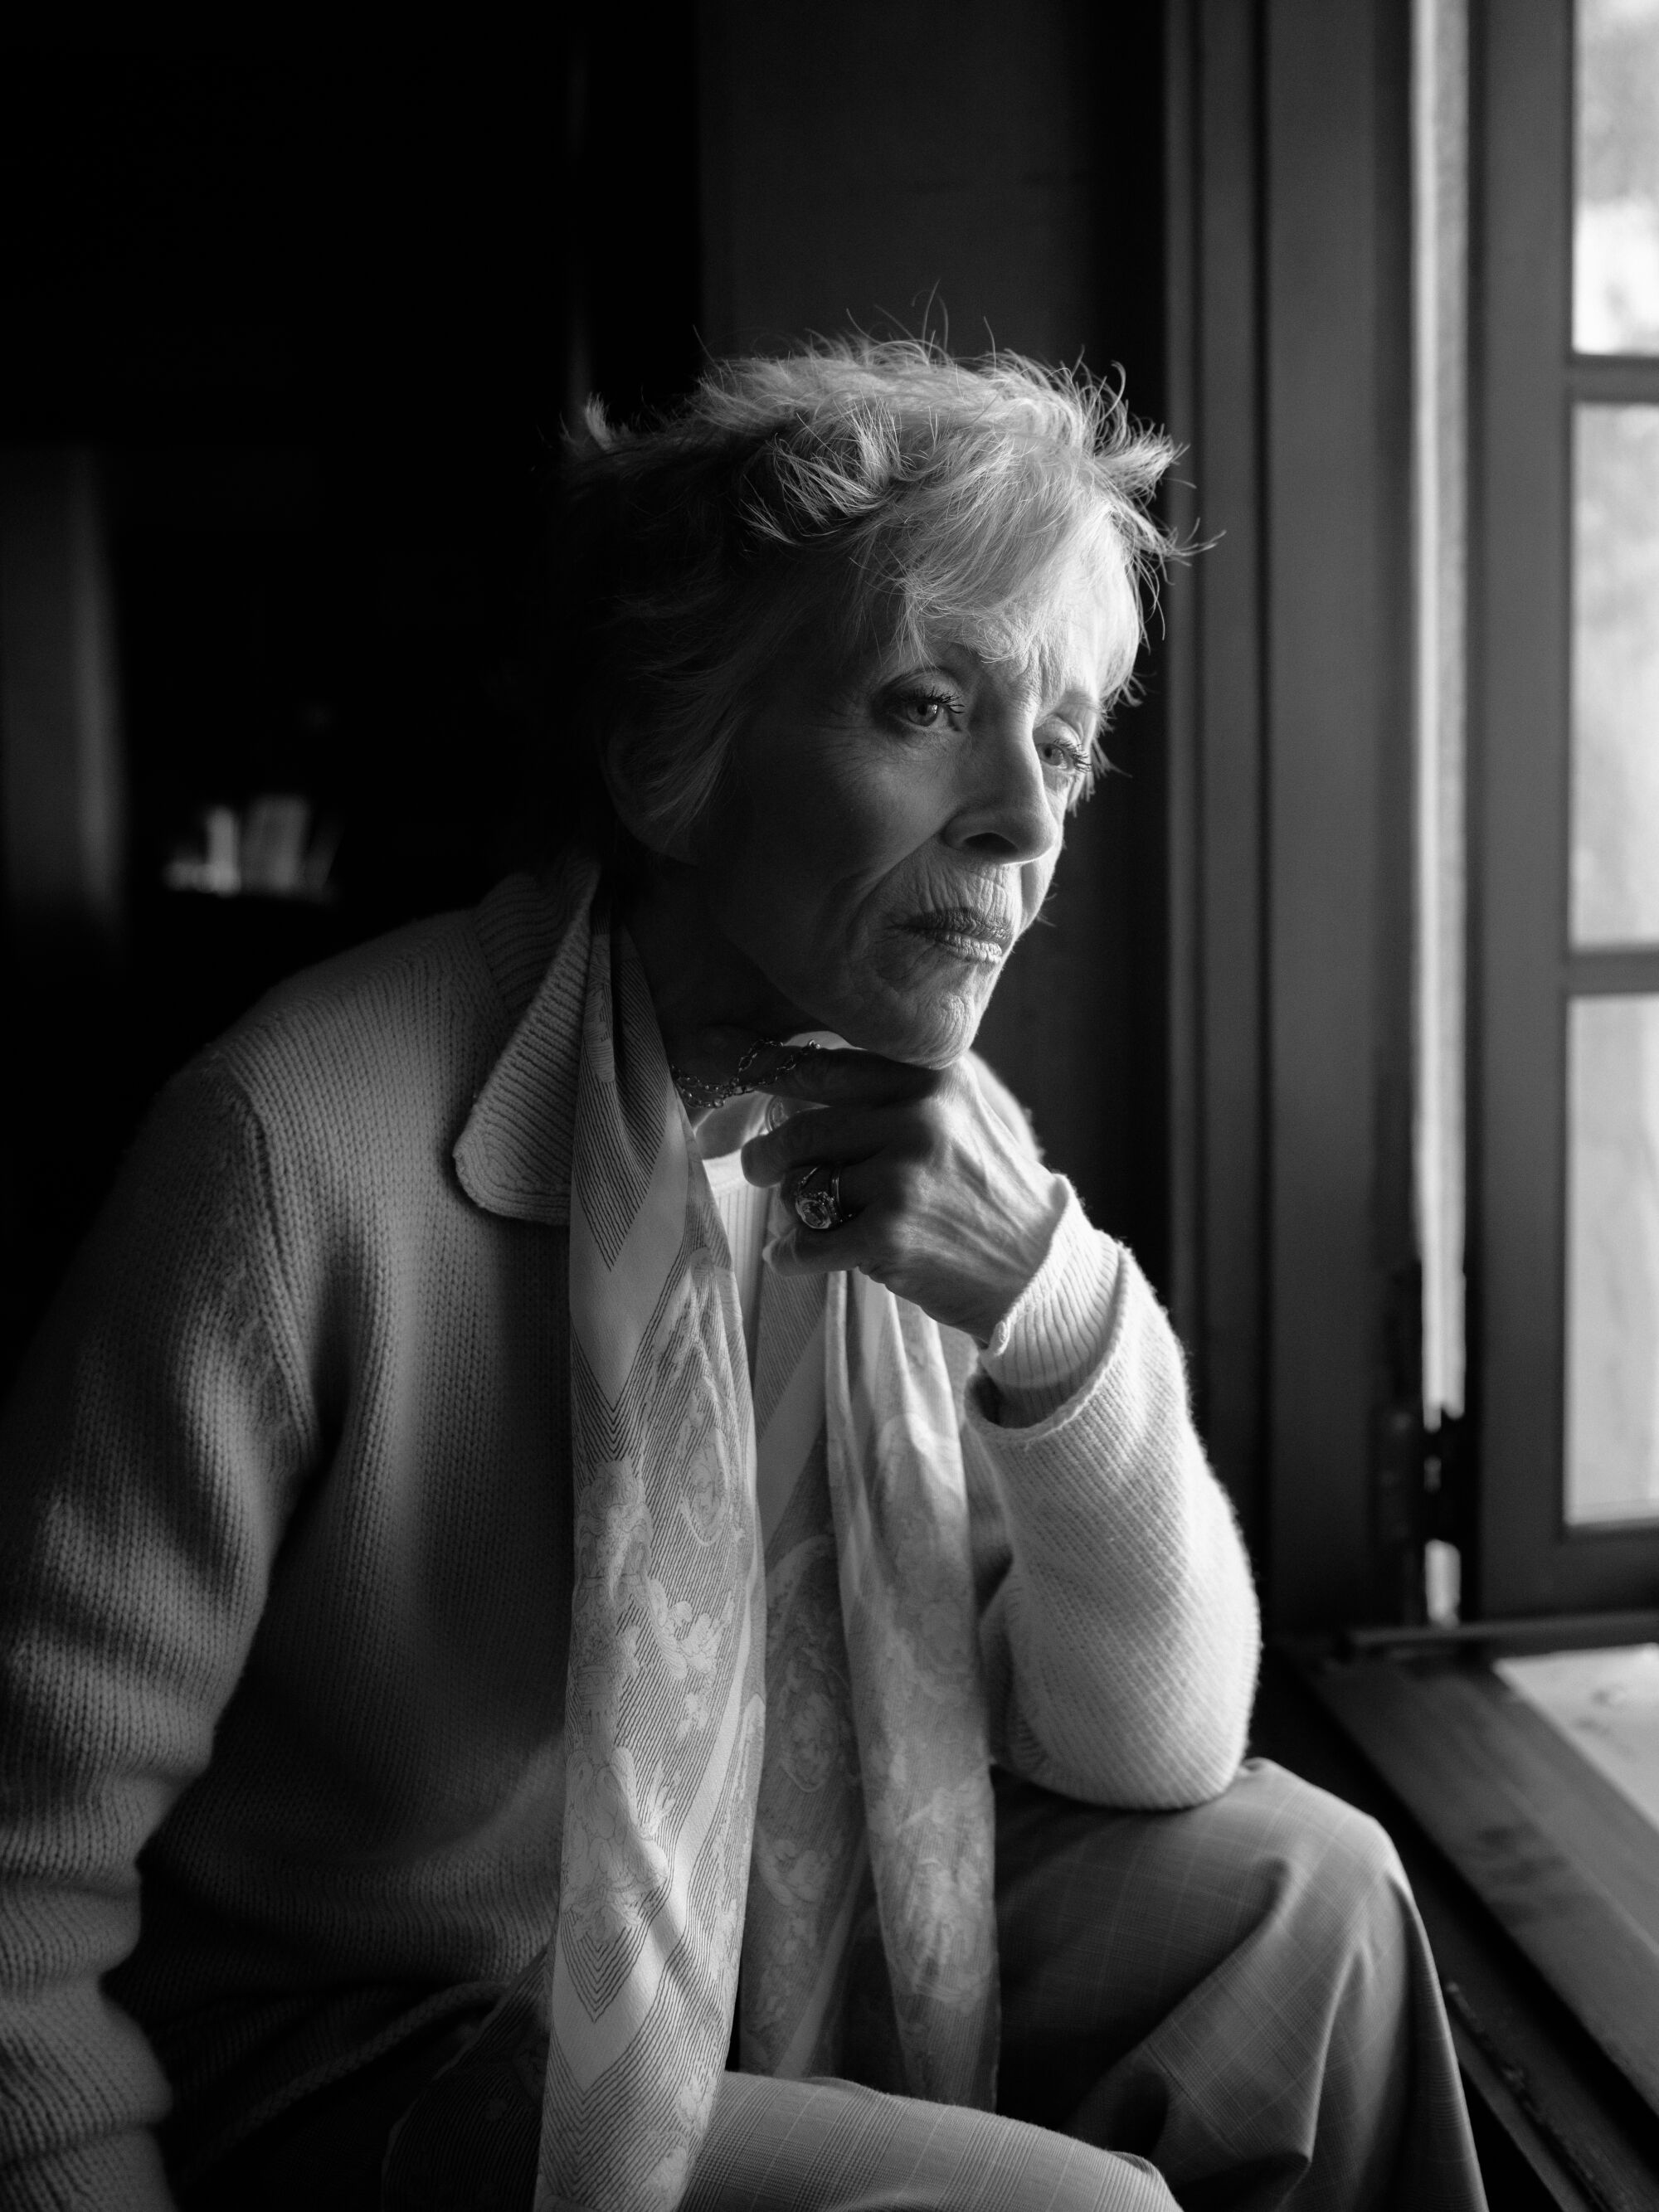 A black-and-white portrait of a seated woman looking out a window.